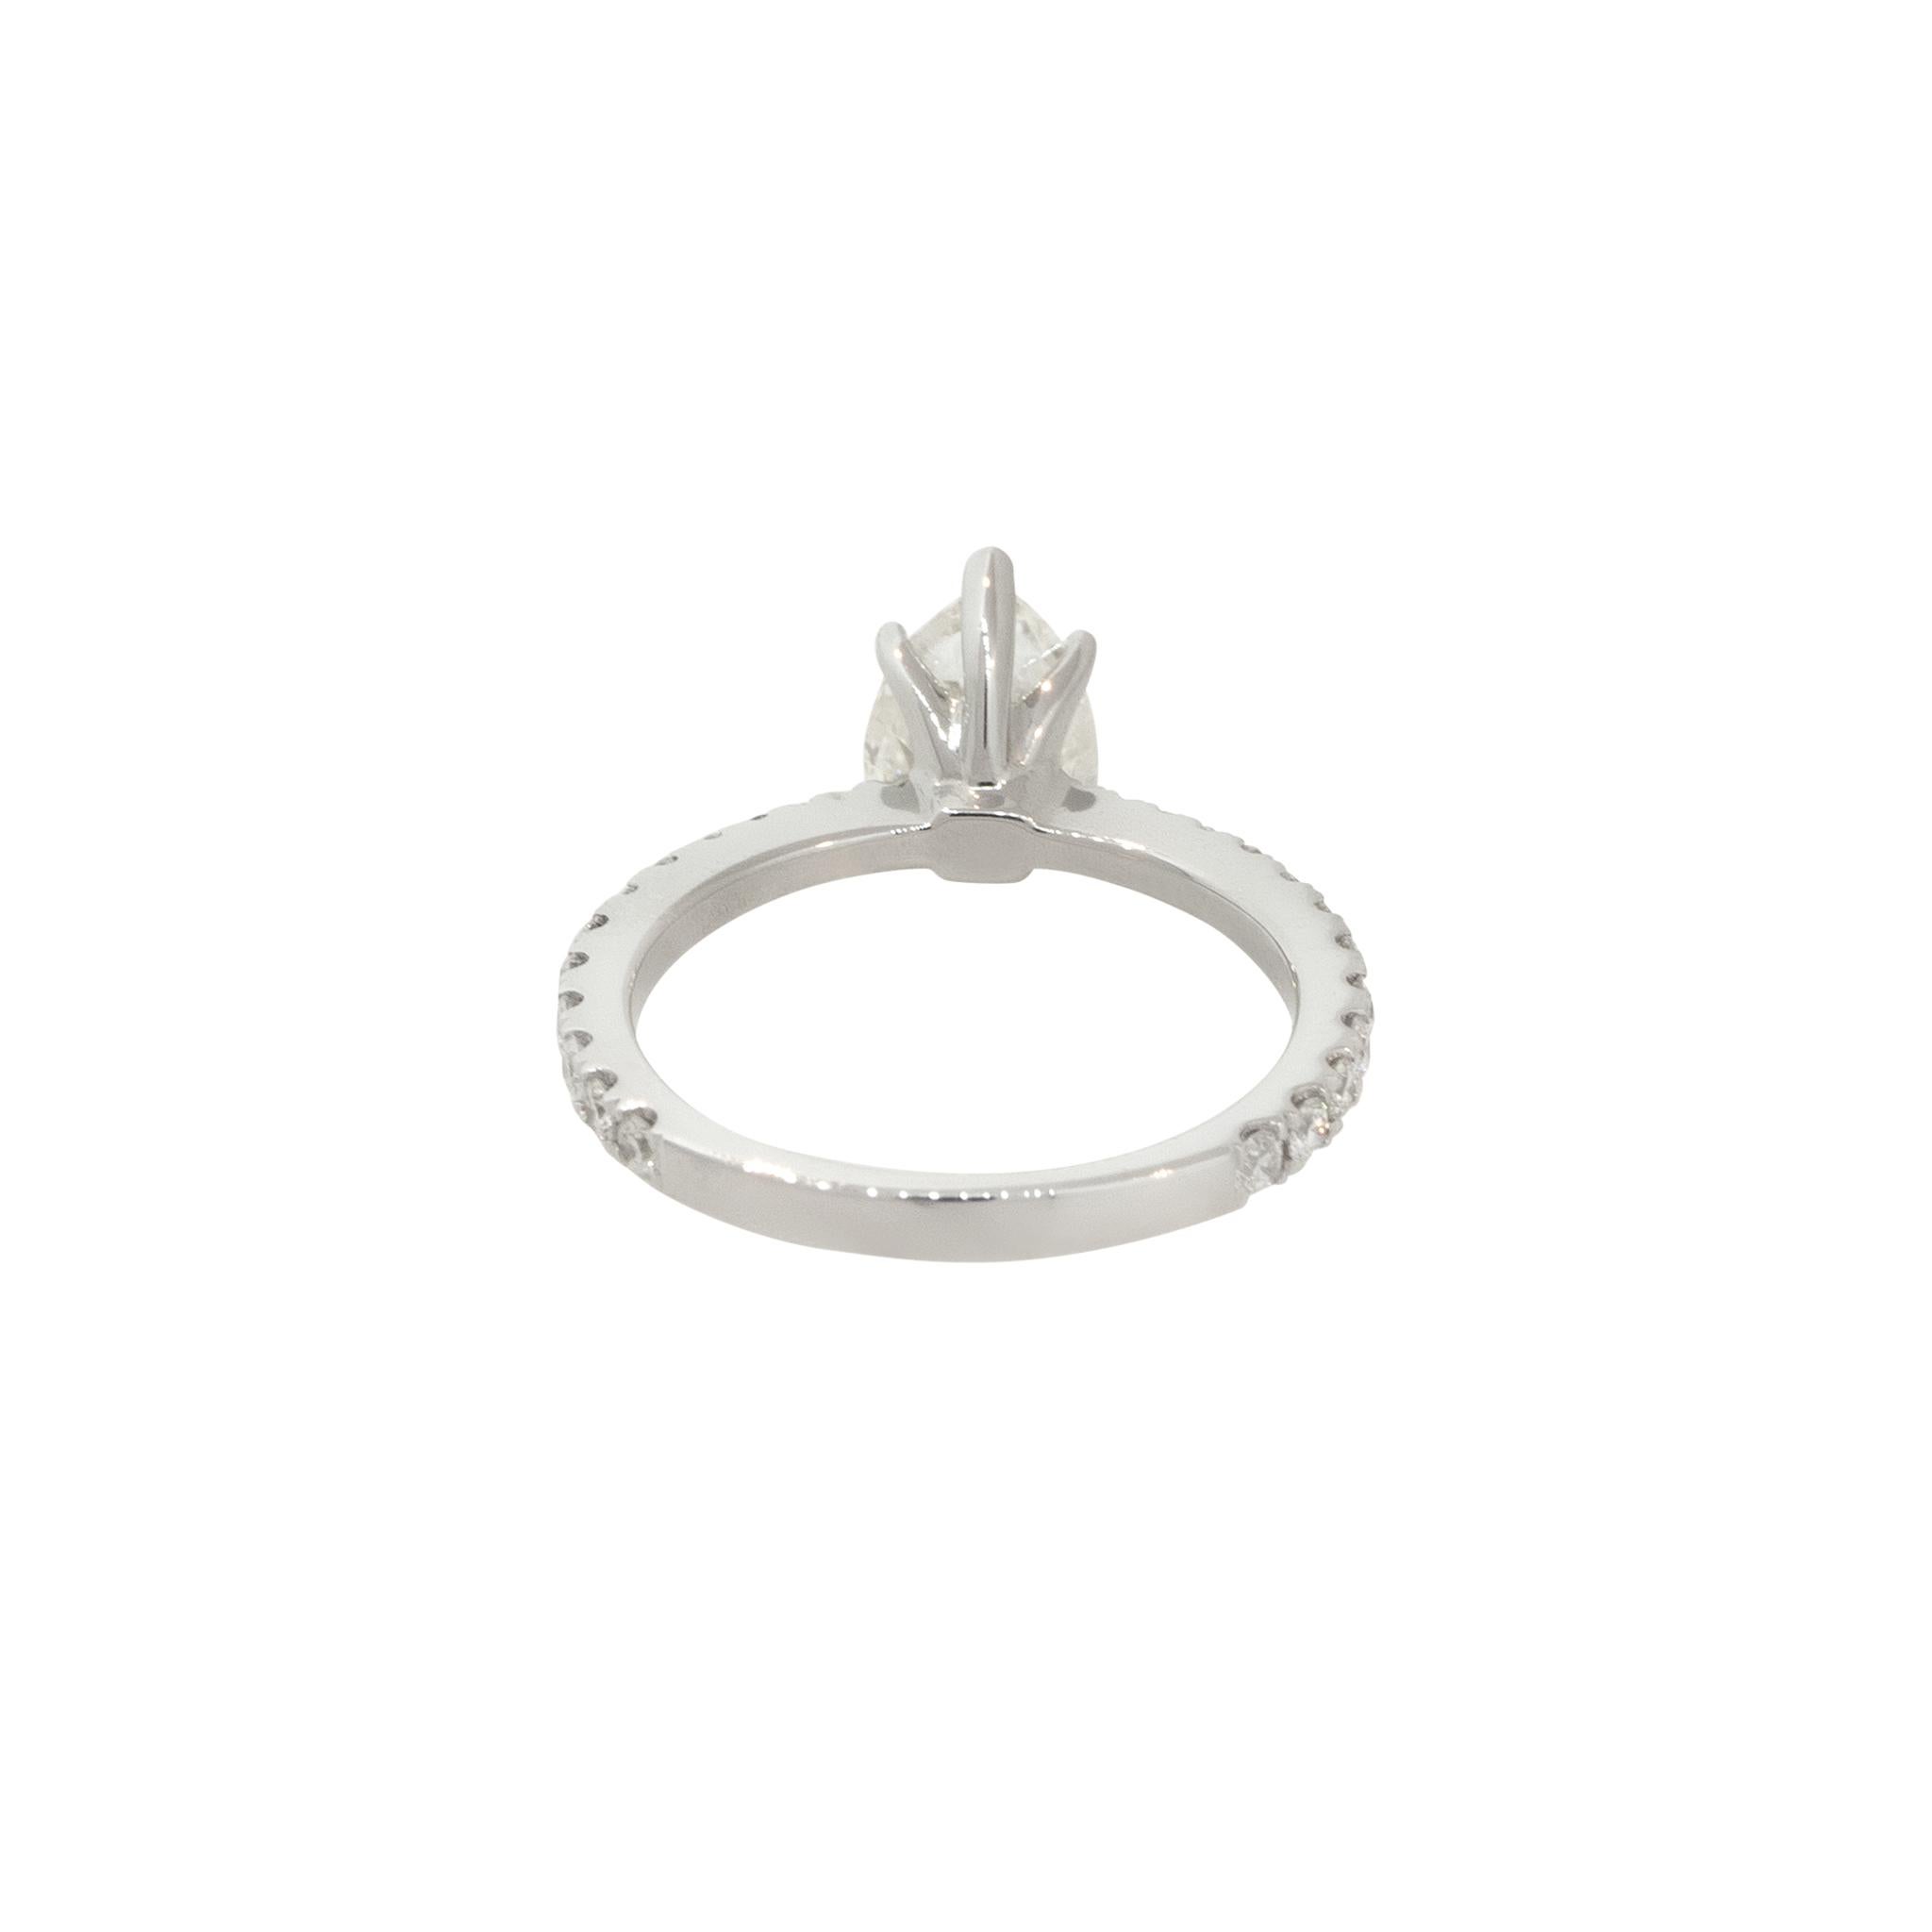 HRD Certified 18k White Gold 1.71ctw Pear Shaped Diamond Engagement Ring

Raymond Lee Jewelers in Boca Raton -- South Florida’s destination for diamonds, fine jewelry, antique jewelry, estate pieces, and vintage jewels.

Style: Women's 4 Prong